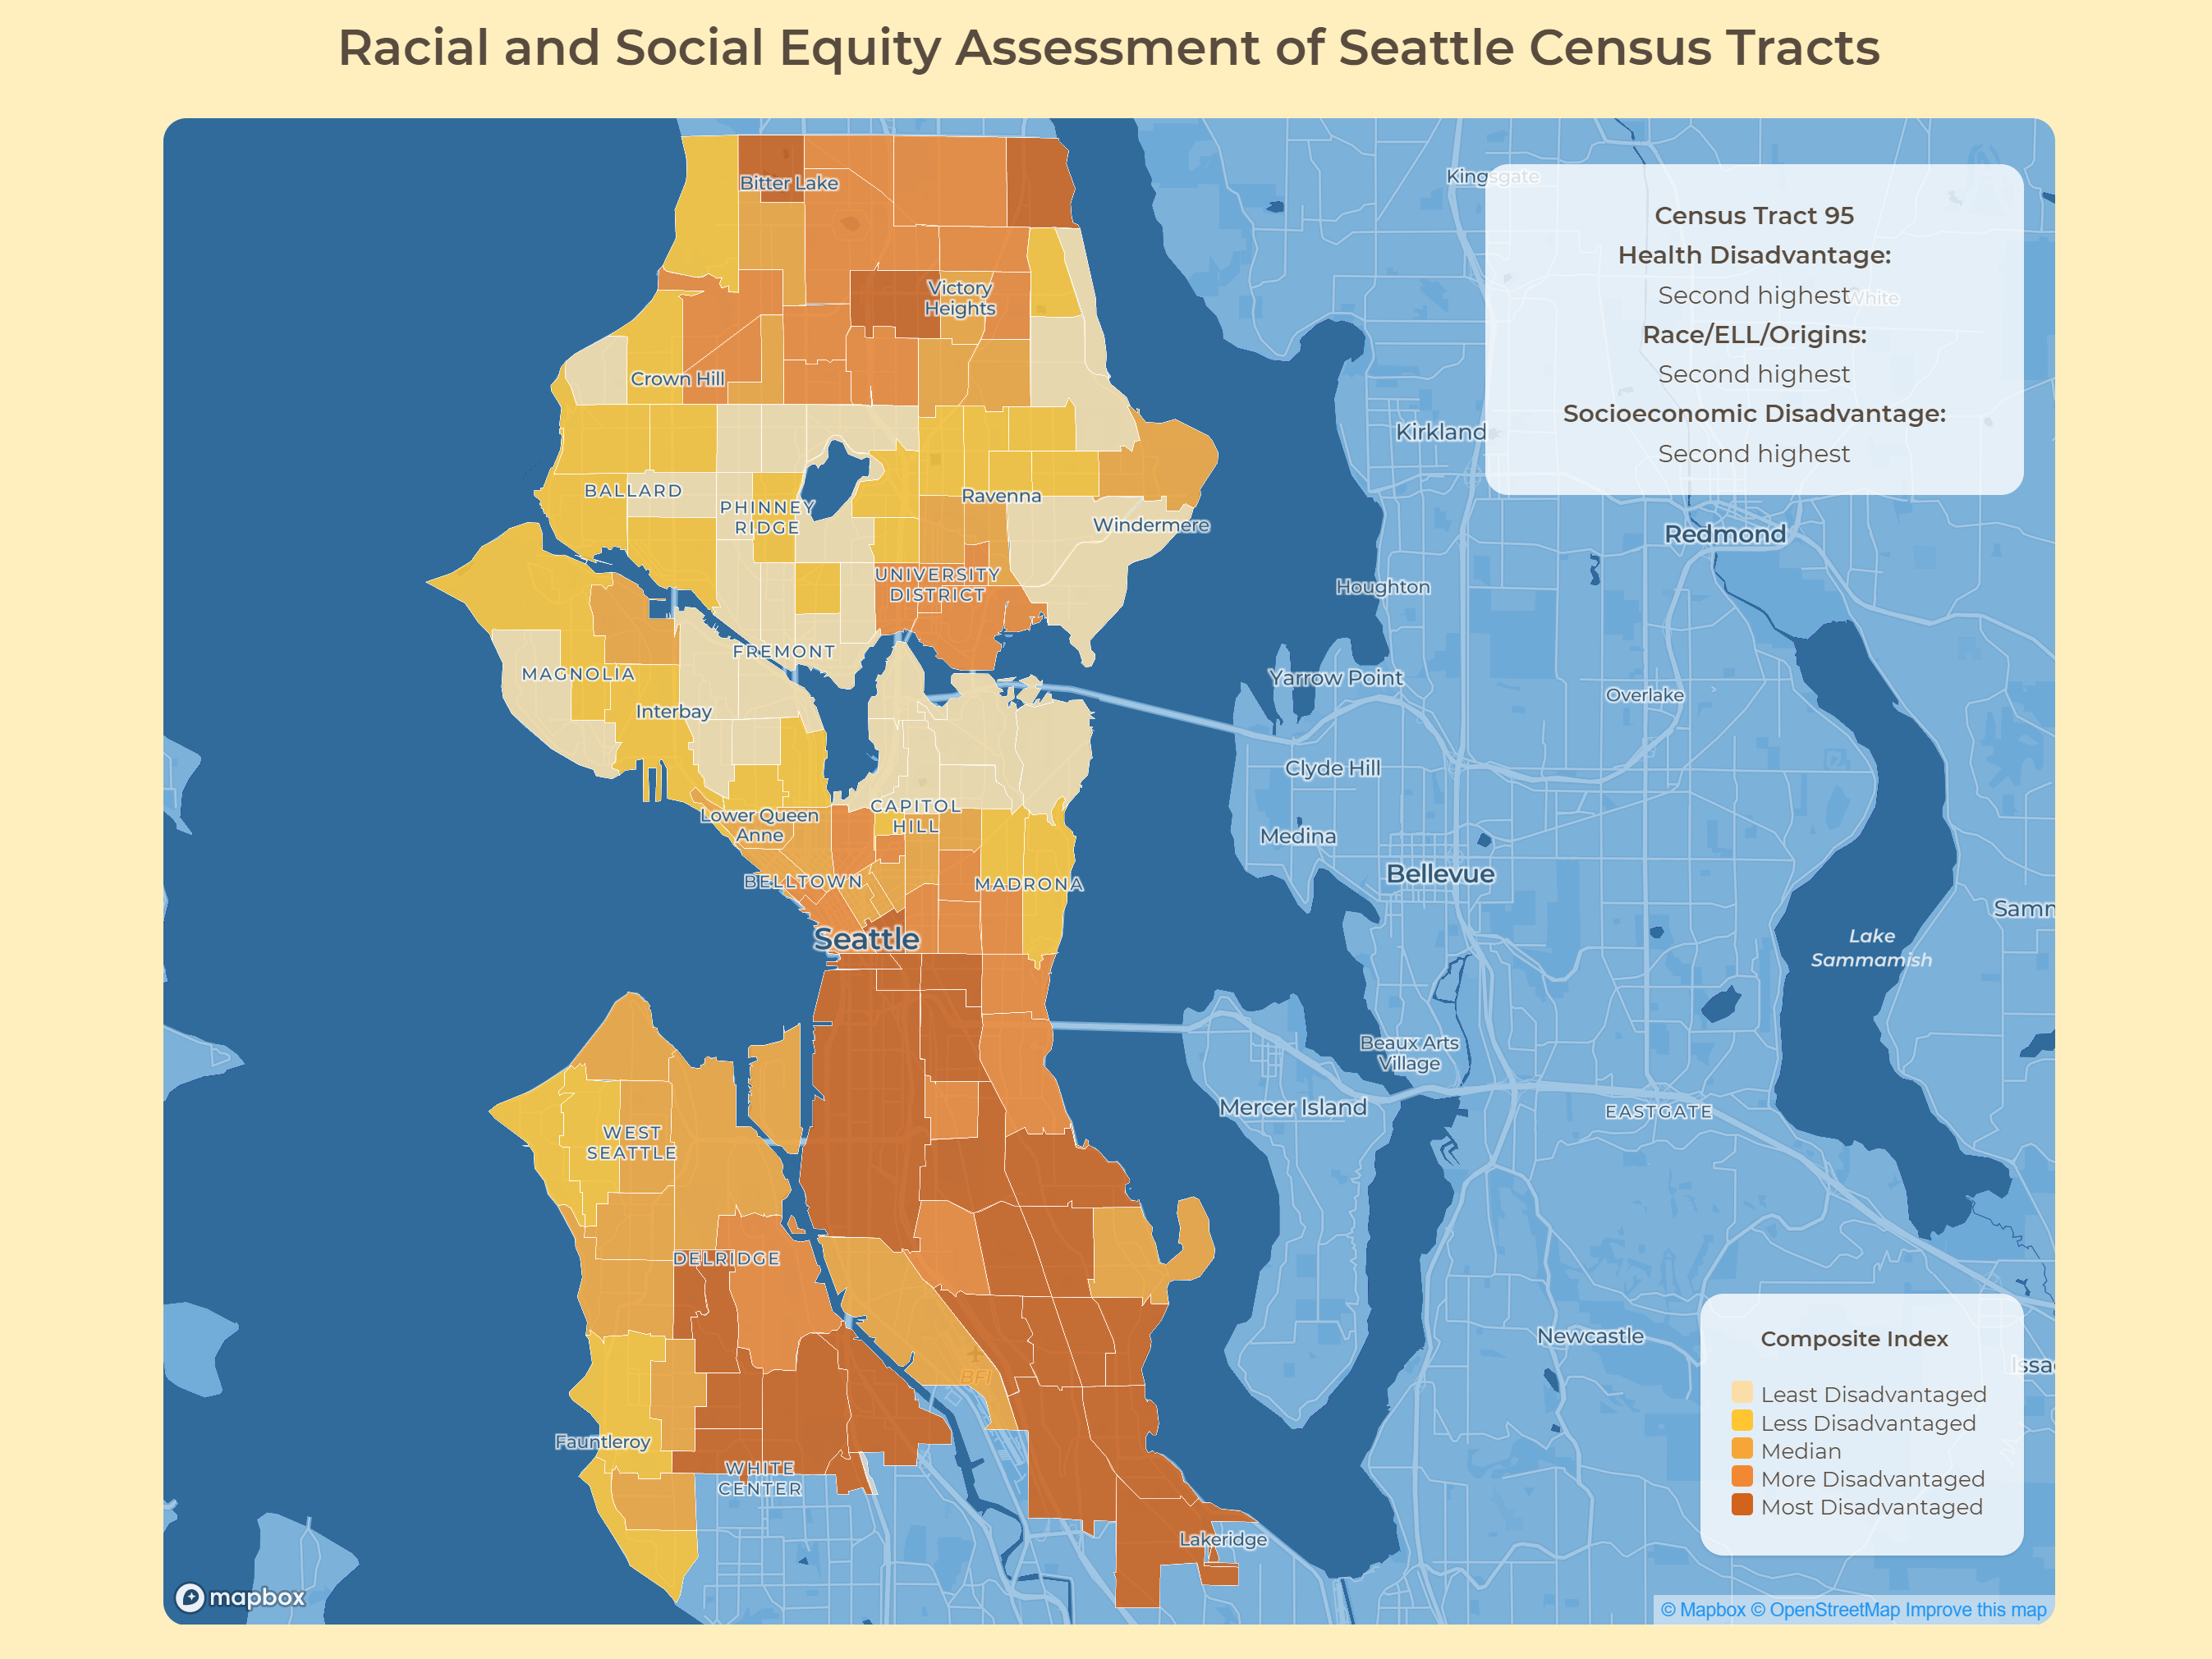 Racial and Social Equity in Seattle